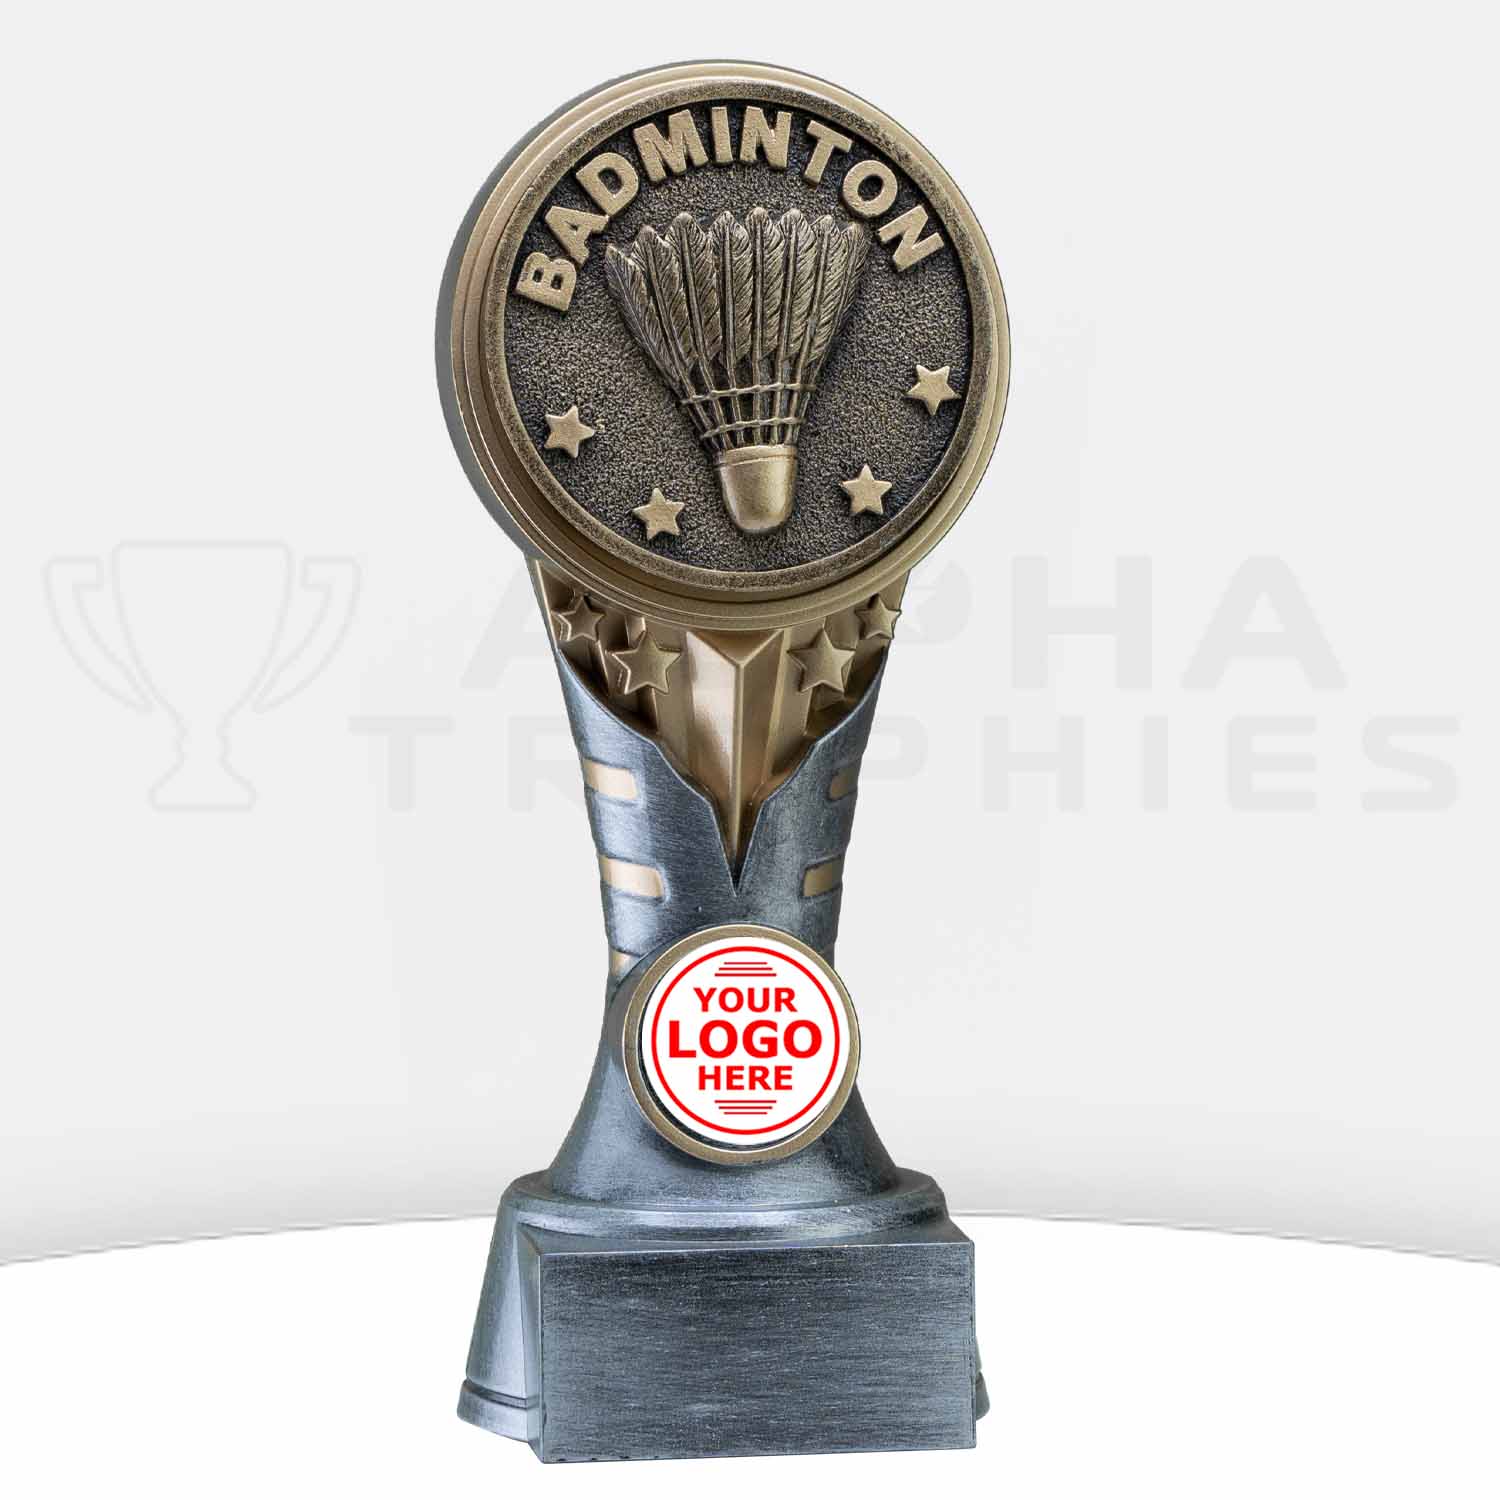 ikon-trophy-badminton-kn246a-front-with-logo